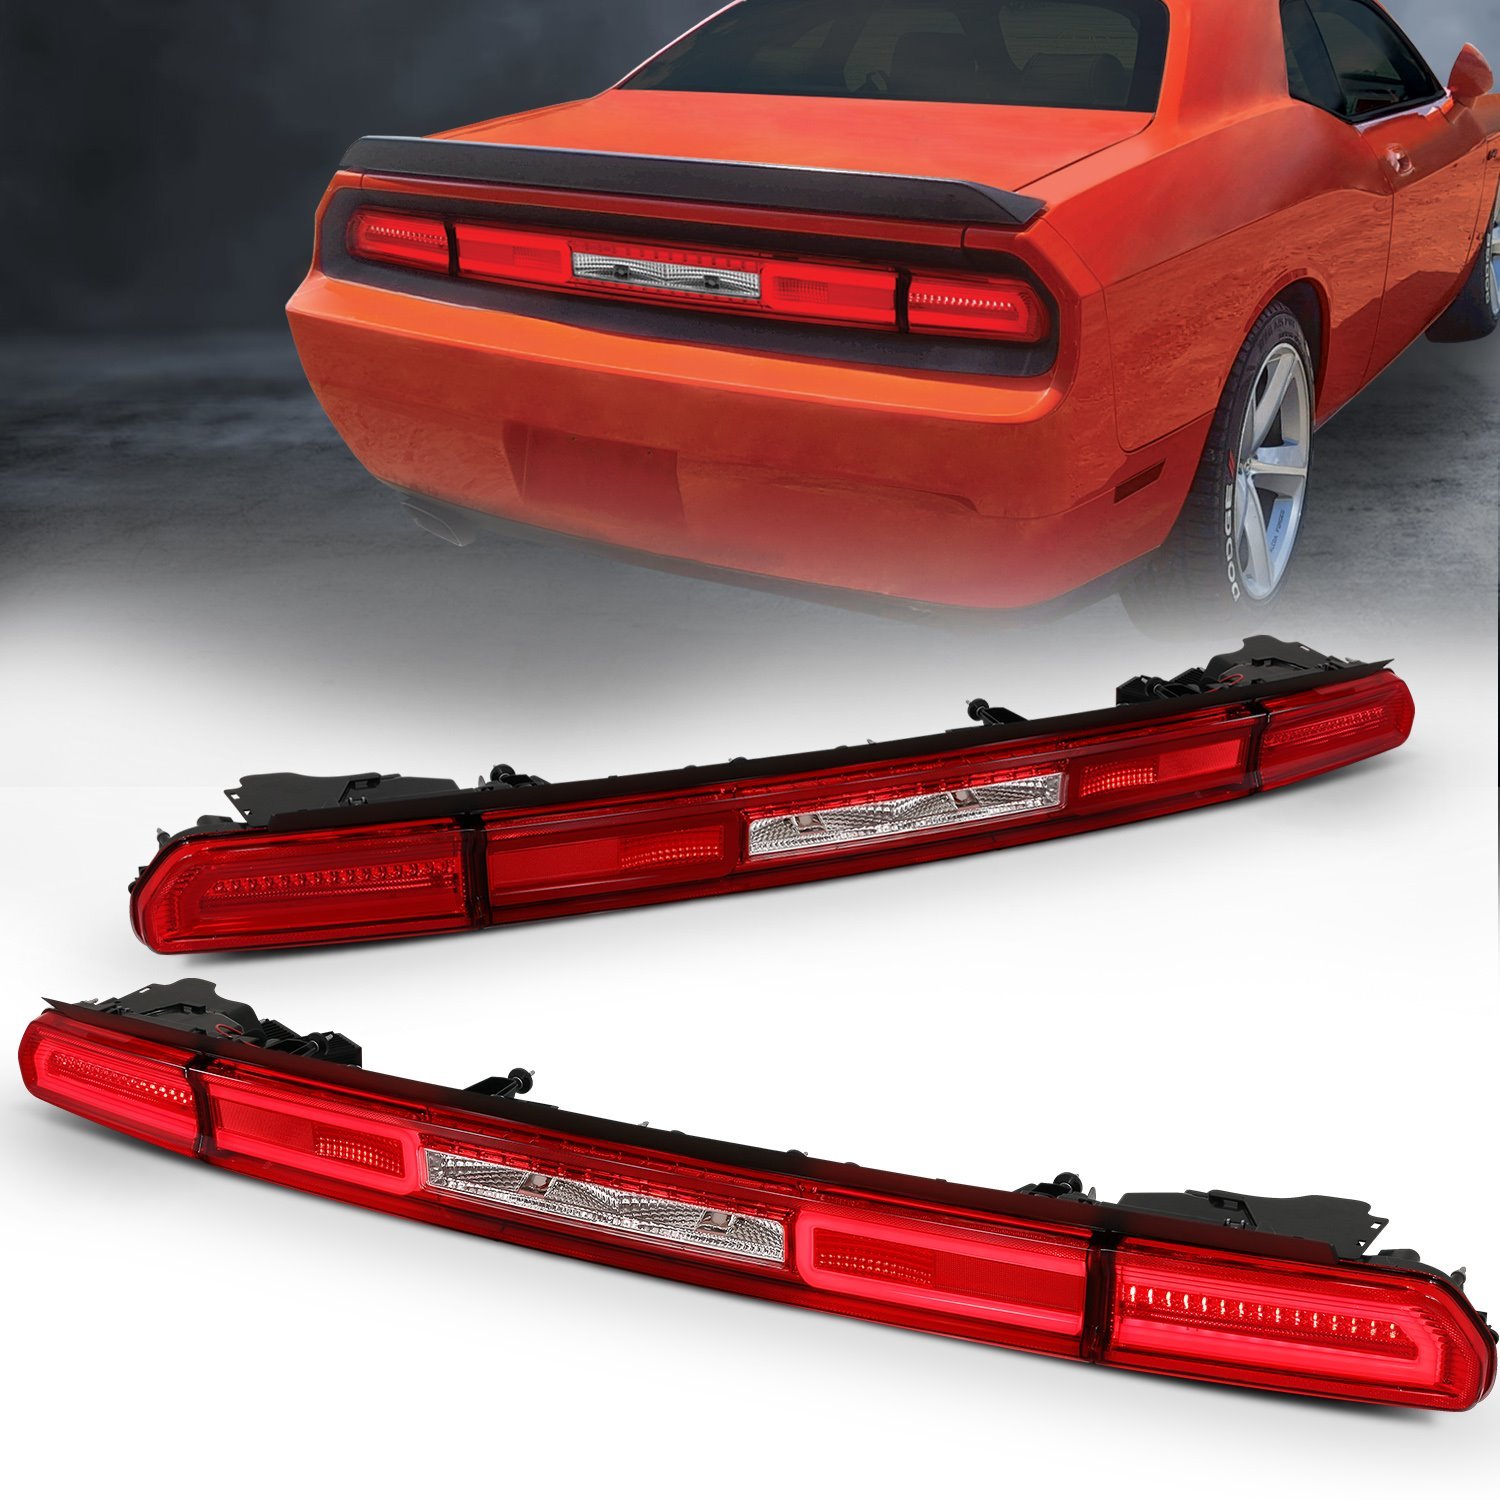 LED TAILLIGHTS